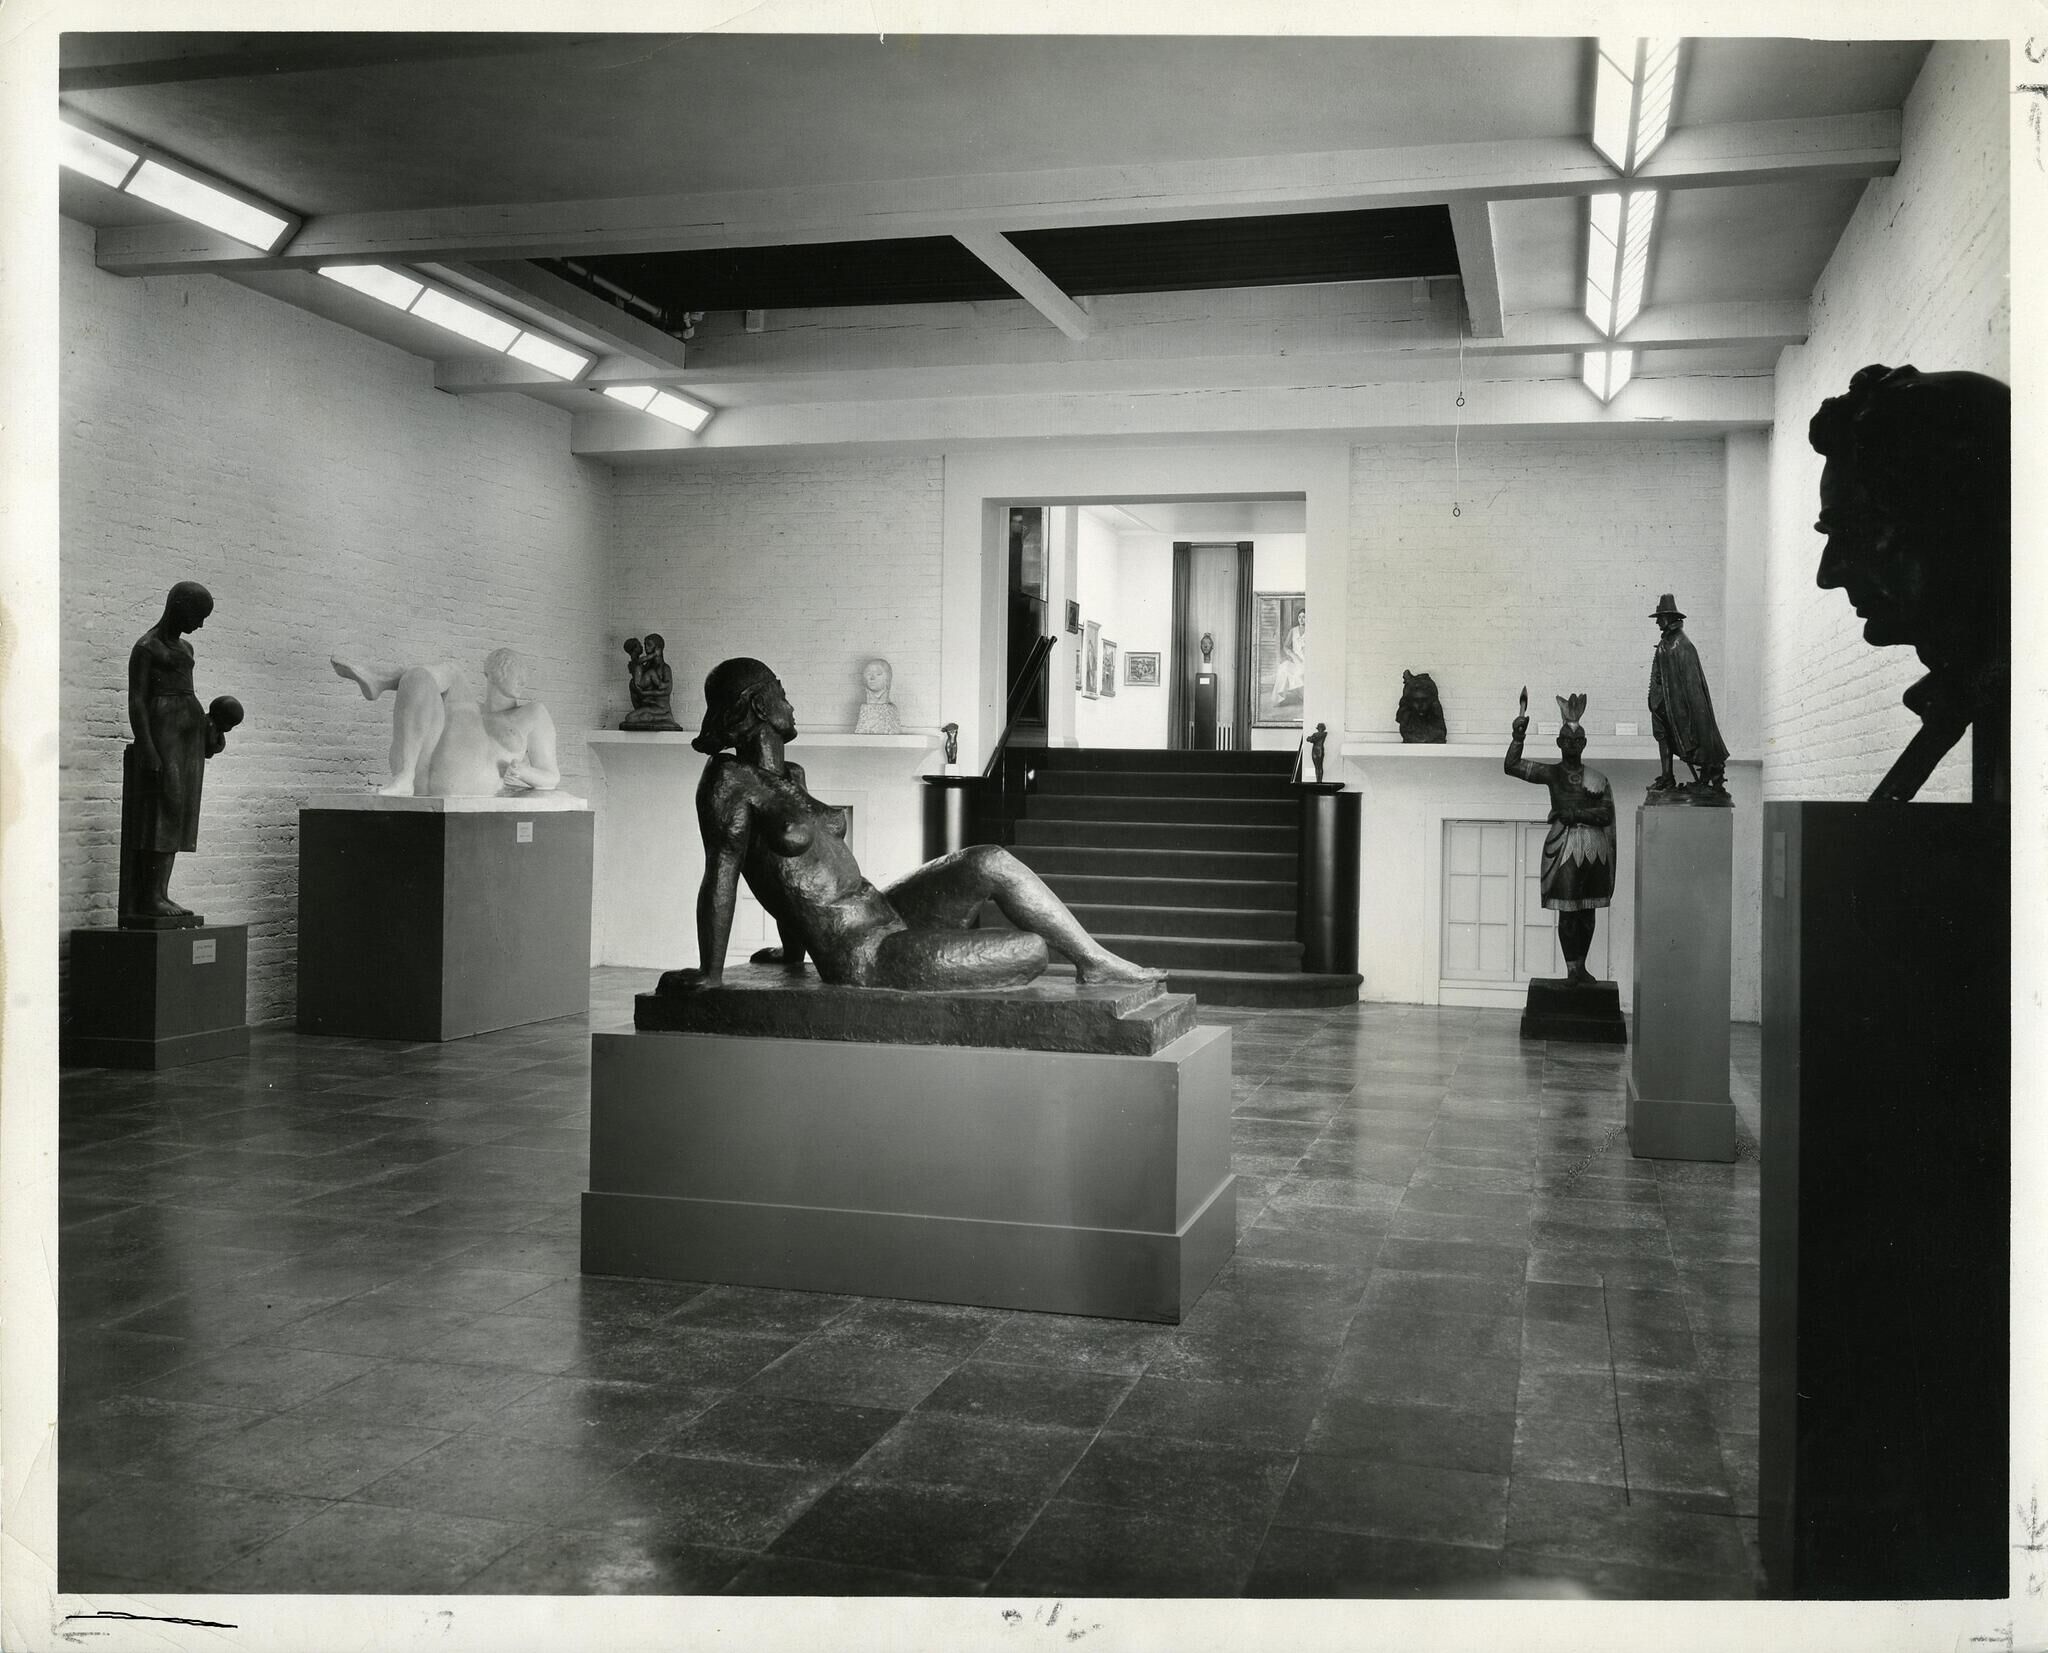 Interior of an art gallery with various sculptures on display, including a reclining figure in the foreground.